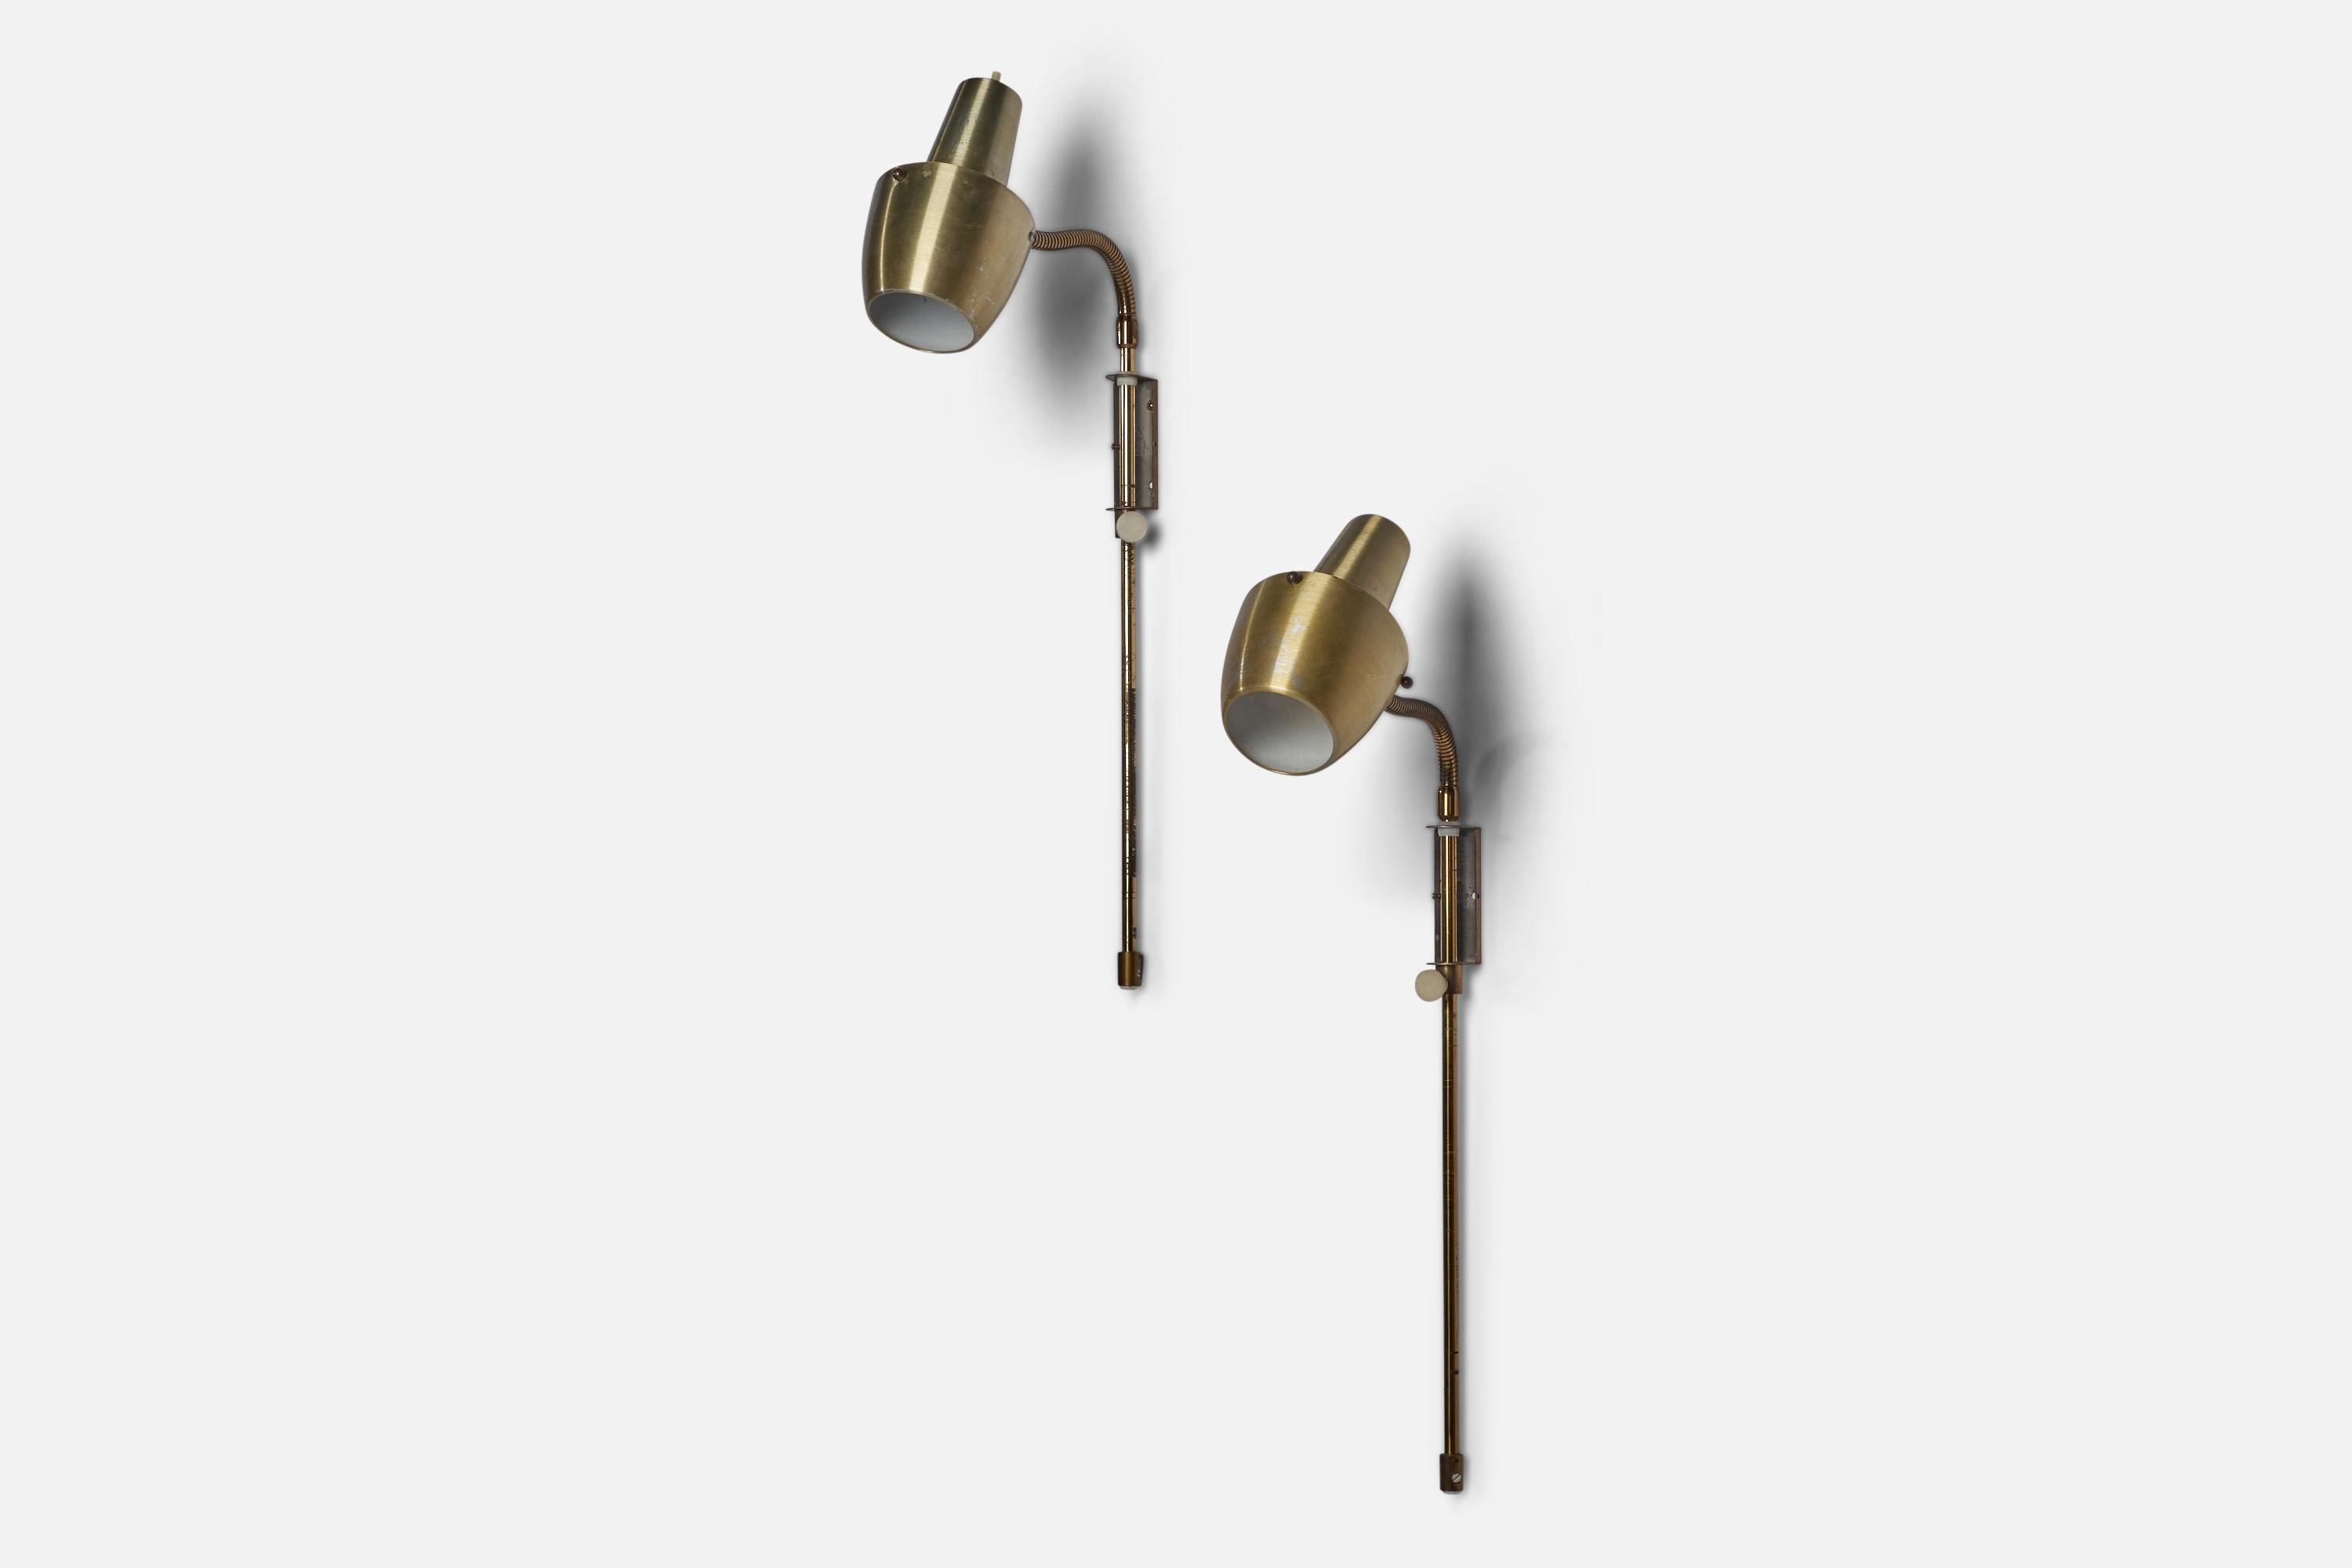 A pair of adjustable brass wall lights designed and produced in Sweden, 1970s.

Overall Dimensions (inches): 25” H x 4” W x 9.25” D
Back Plate Dimensions (inches): 3.25” H x 1.15” W x 0.25” D
Bulb Specifications: E-26 Bulb
Number of Sockets: 1
All